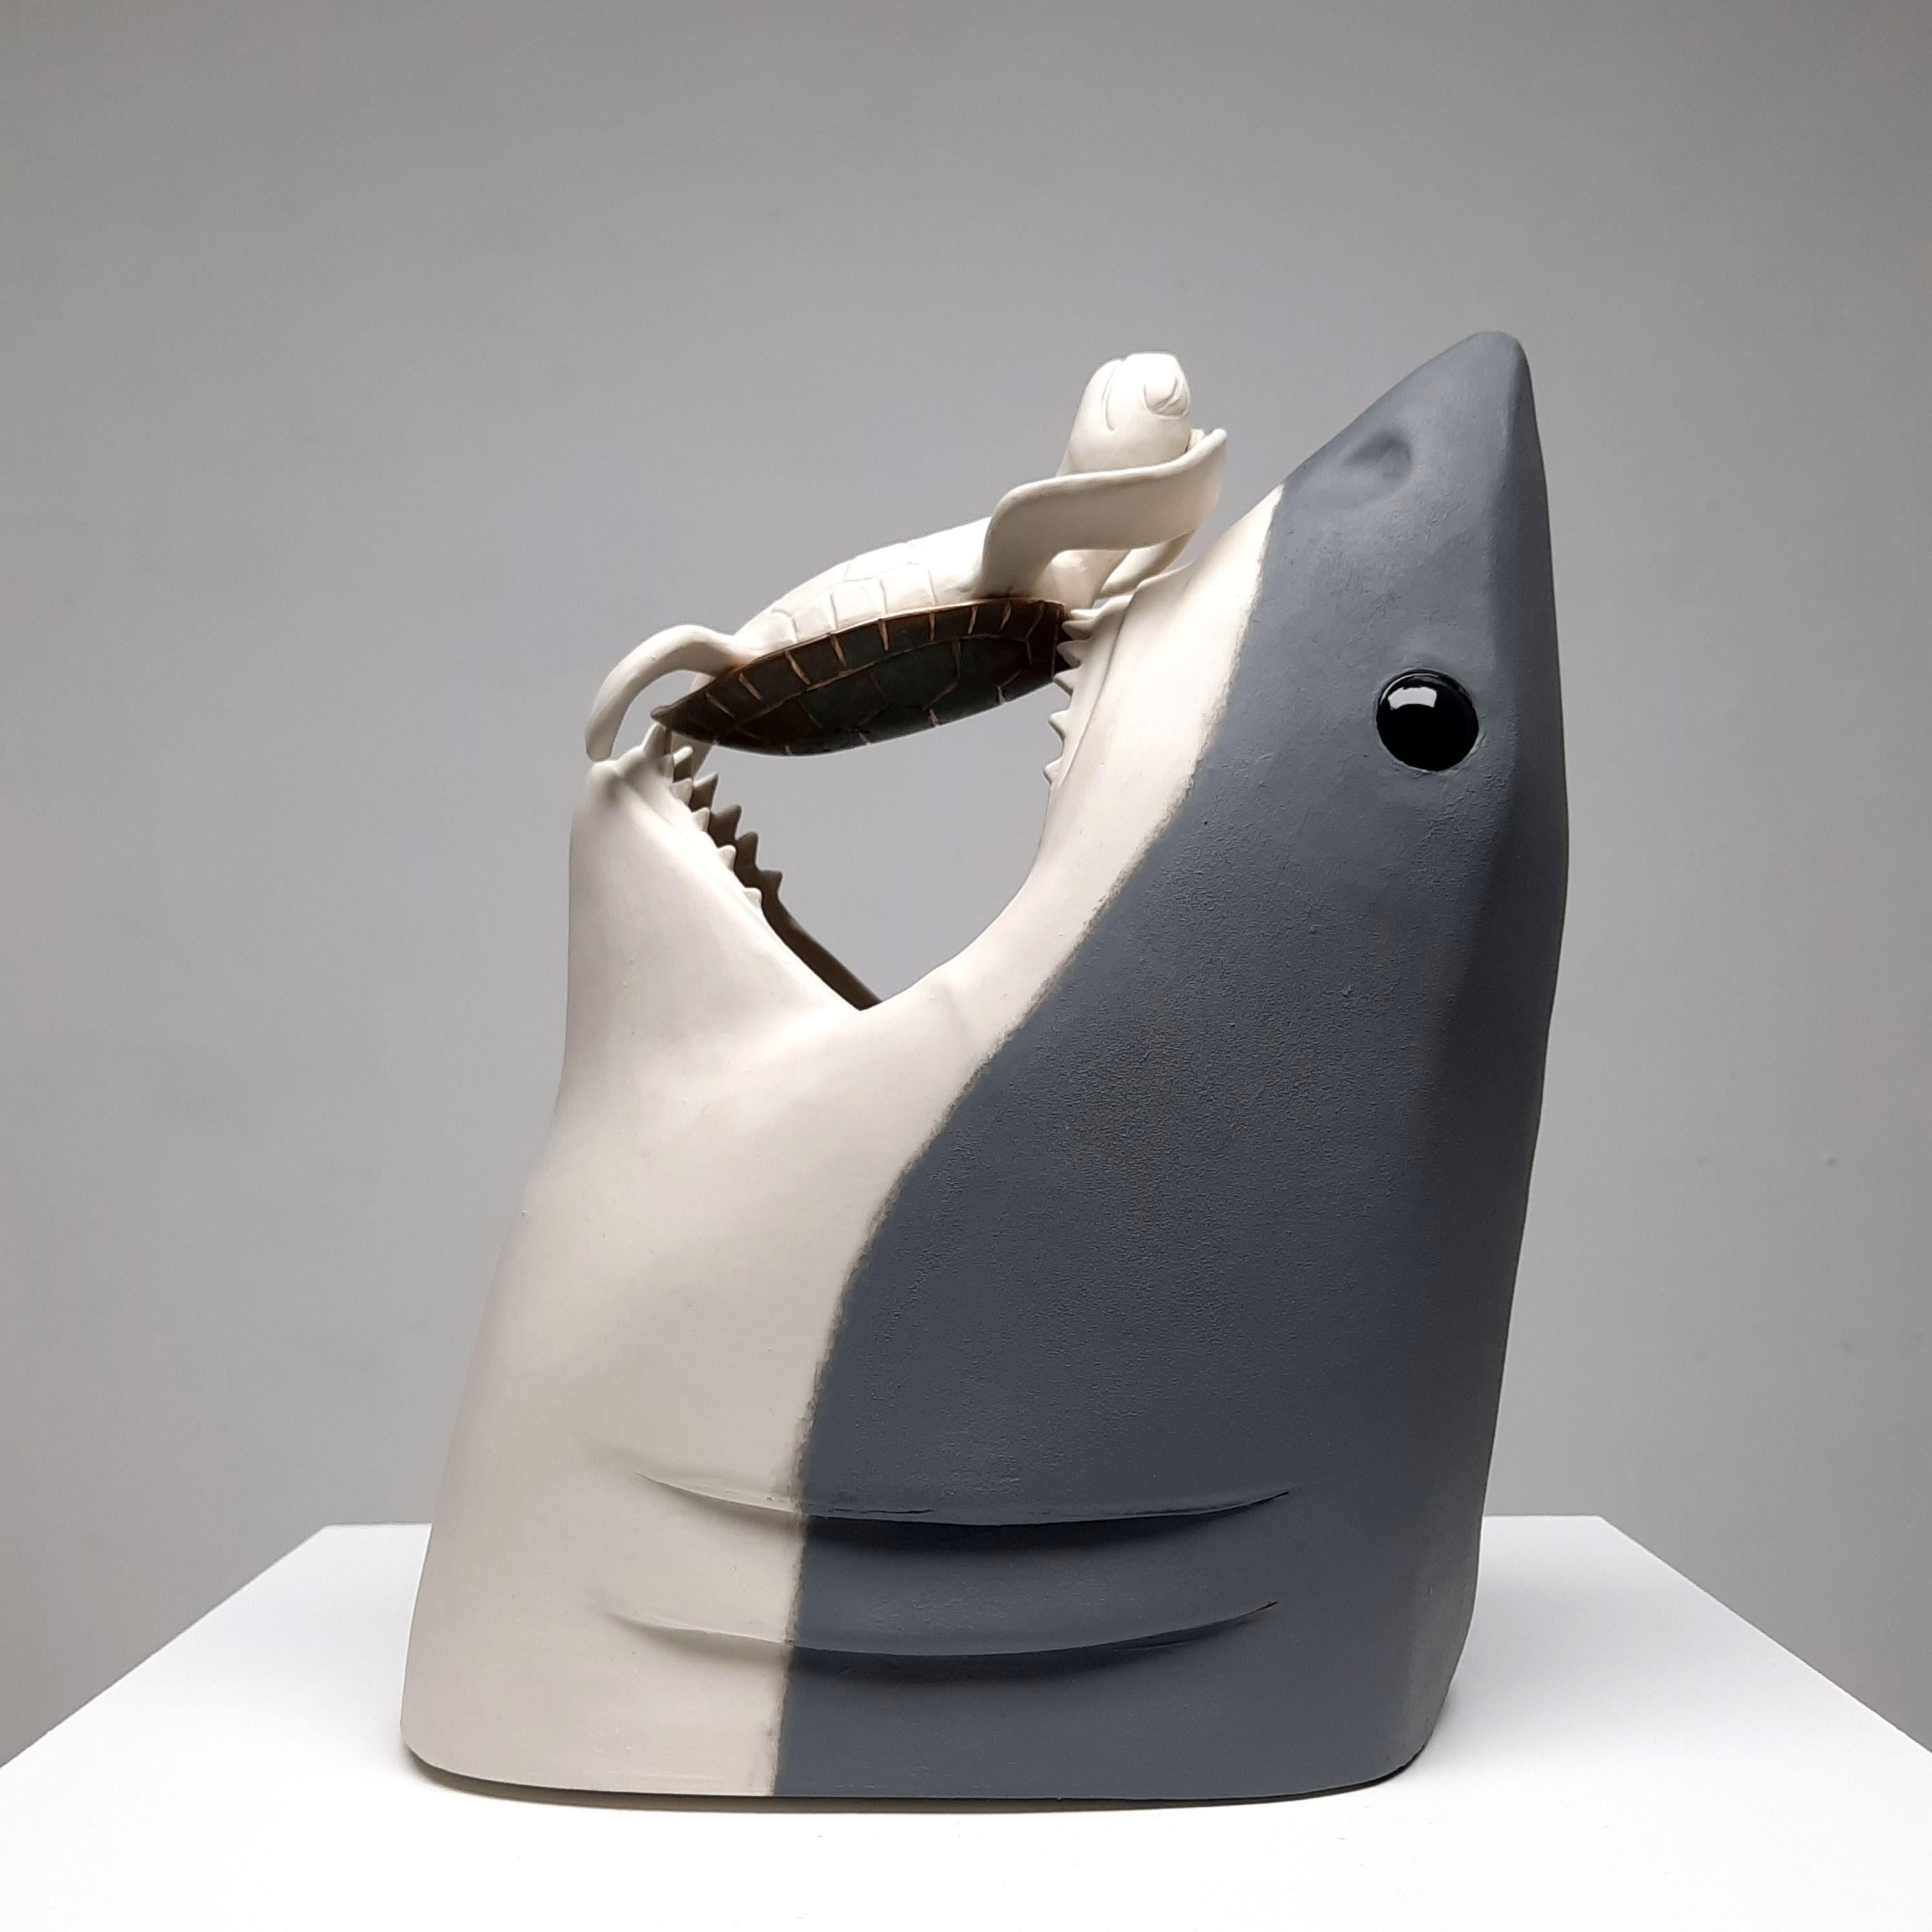 "Life is Short Relax II" by Henk Jan Sanderman is a captivating ceramic tabletop sculpture that invites viewers to embrace the beauty of relaxation and tranquility. This original artwork features two intricately crafted grey shark heads, painted in